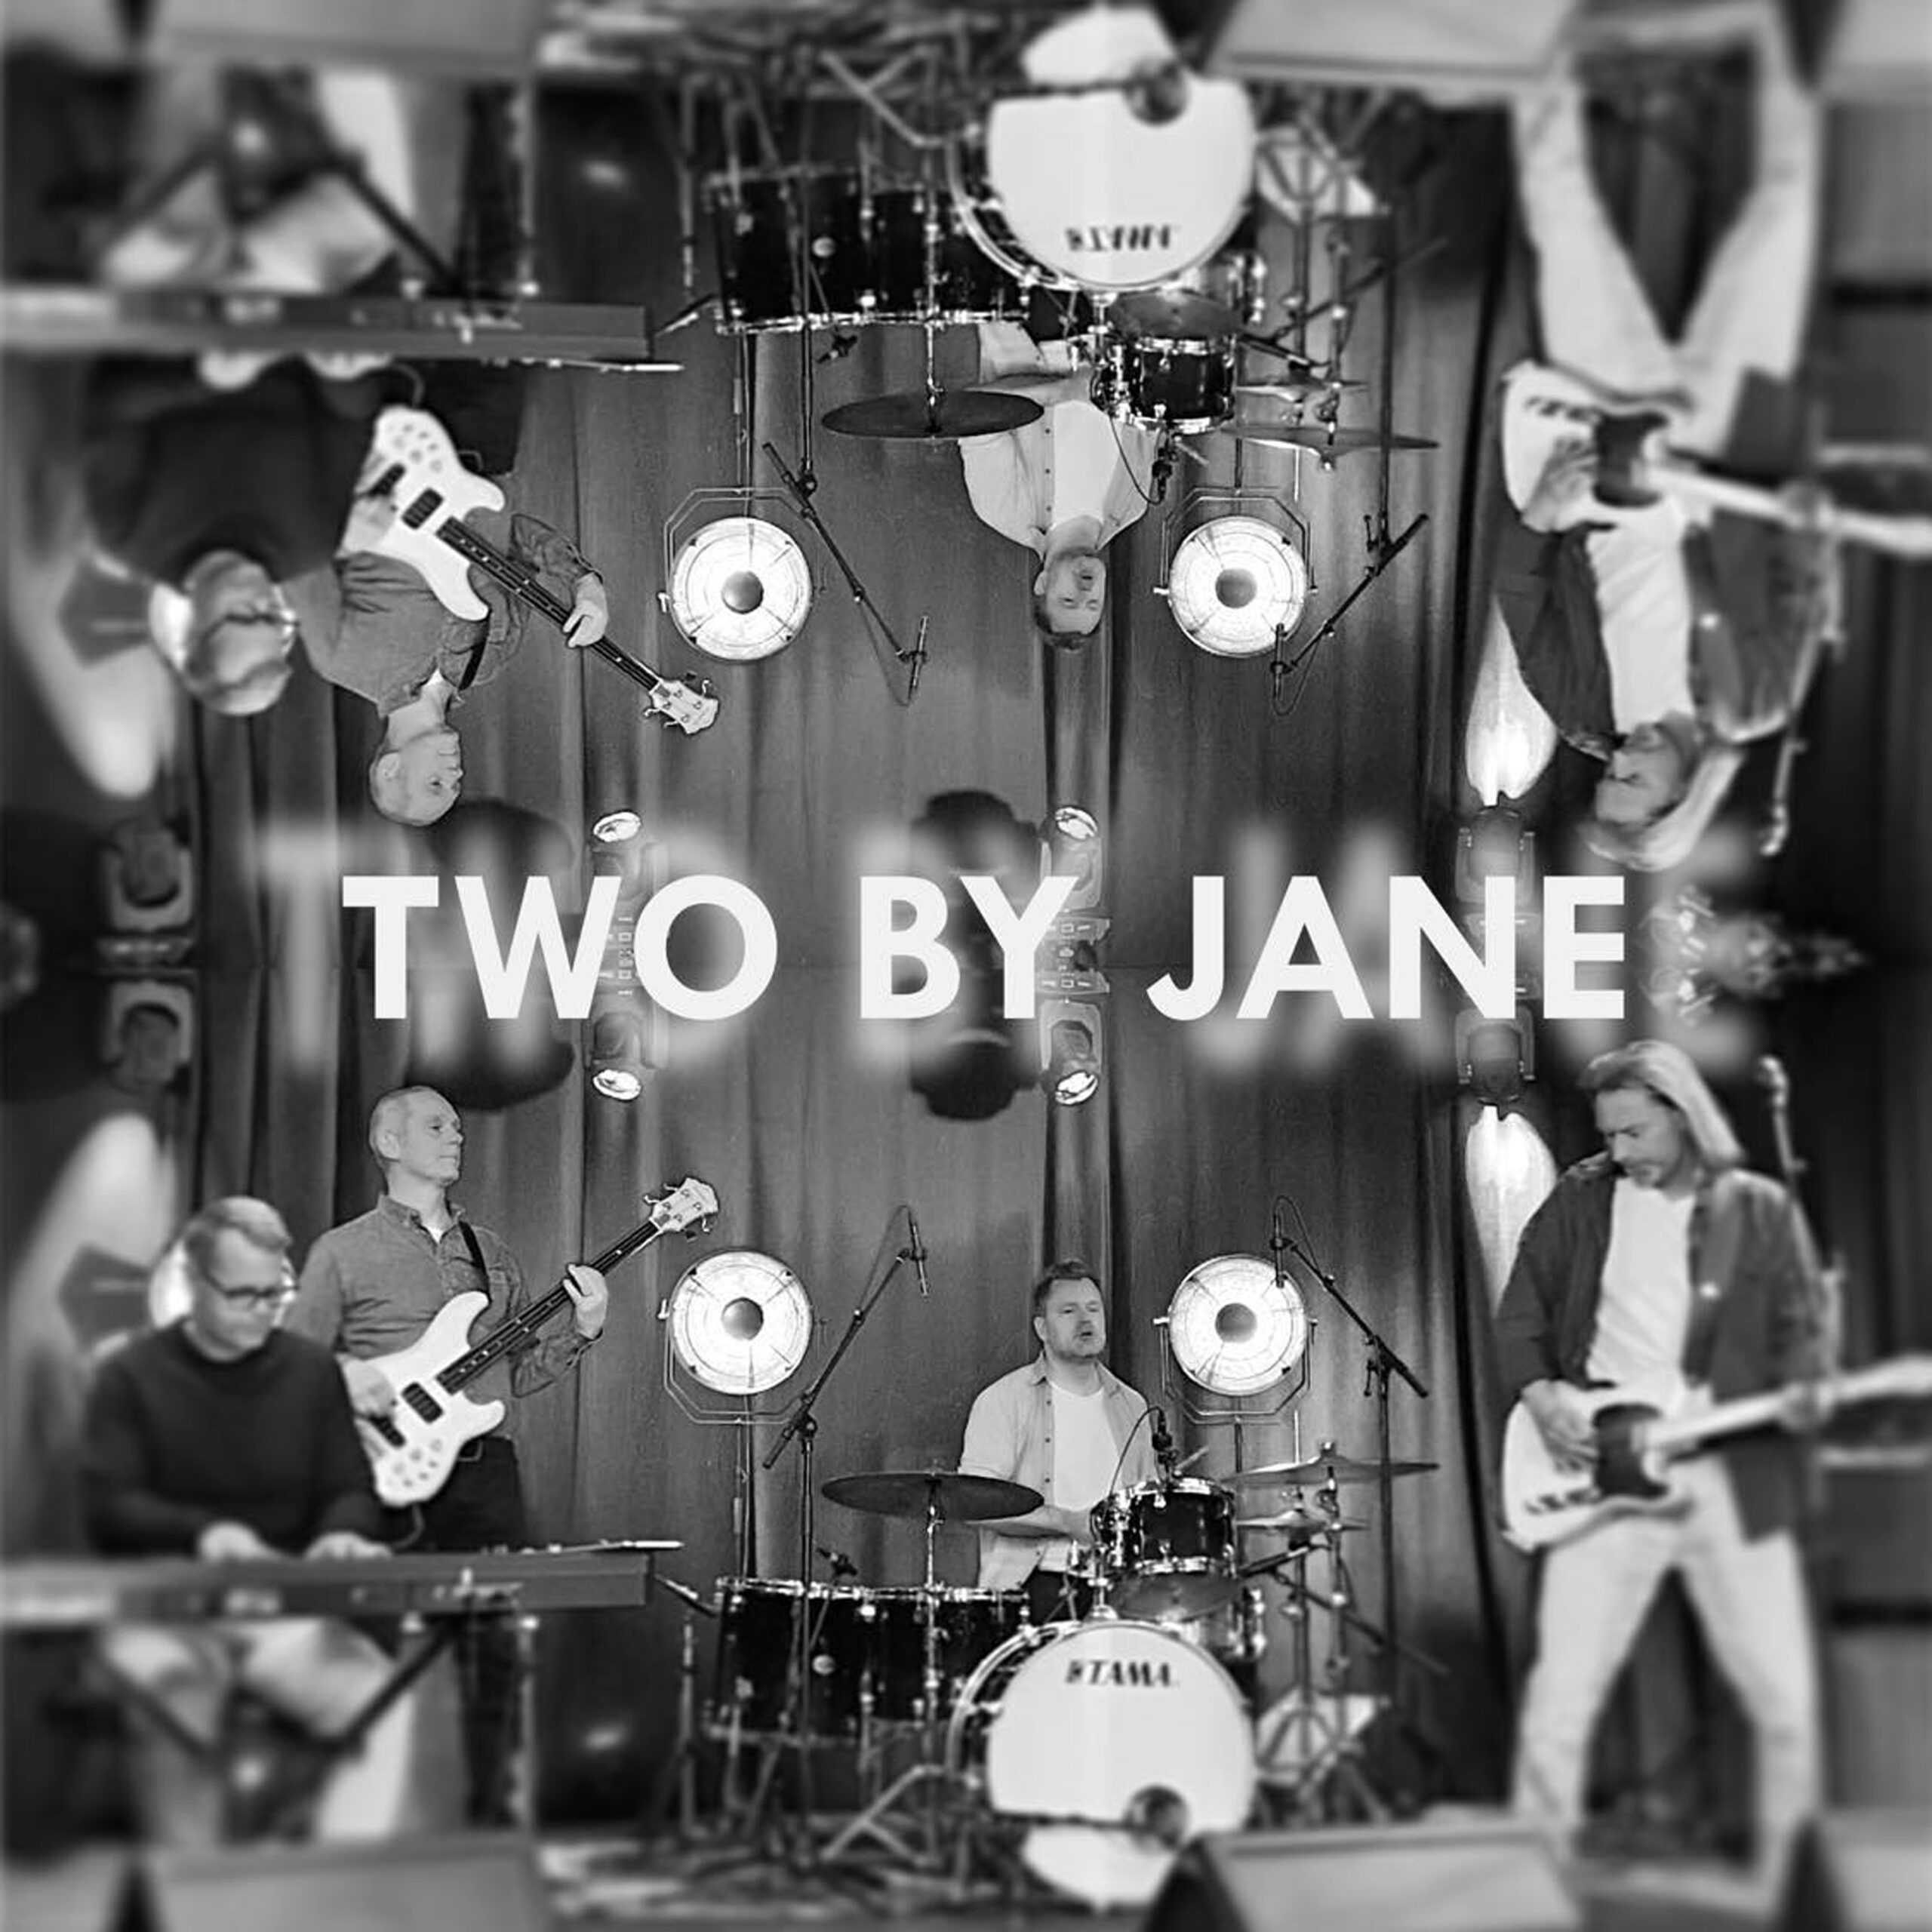 Two by Jane